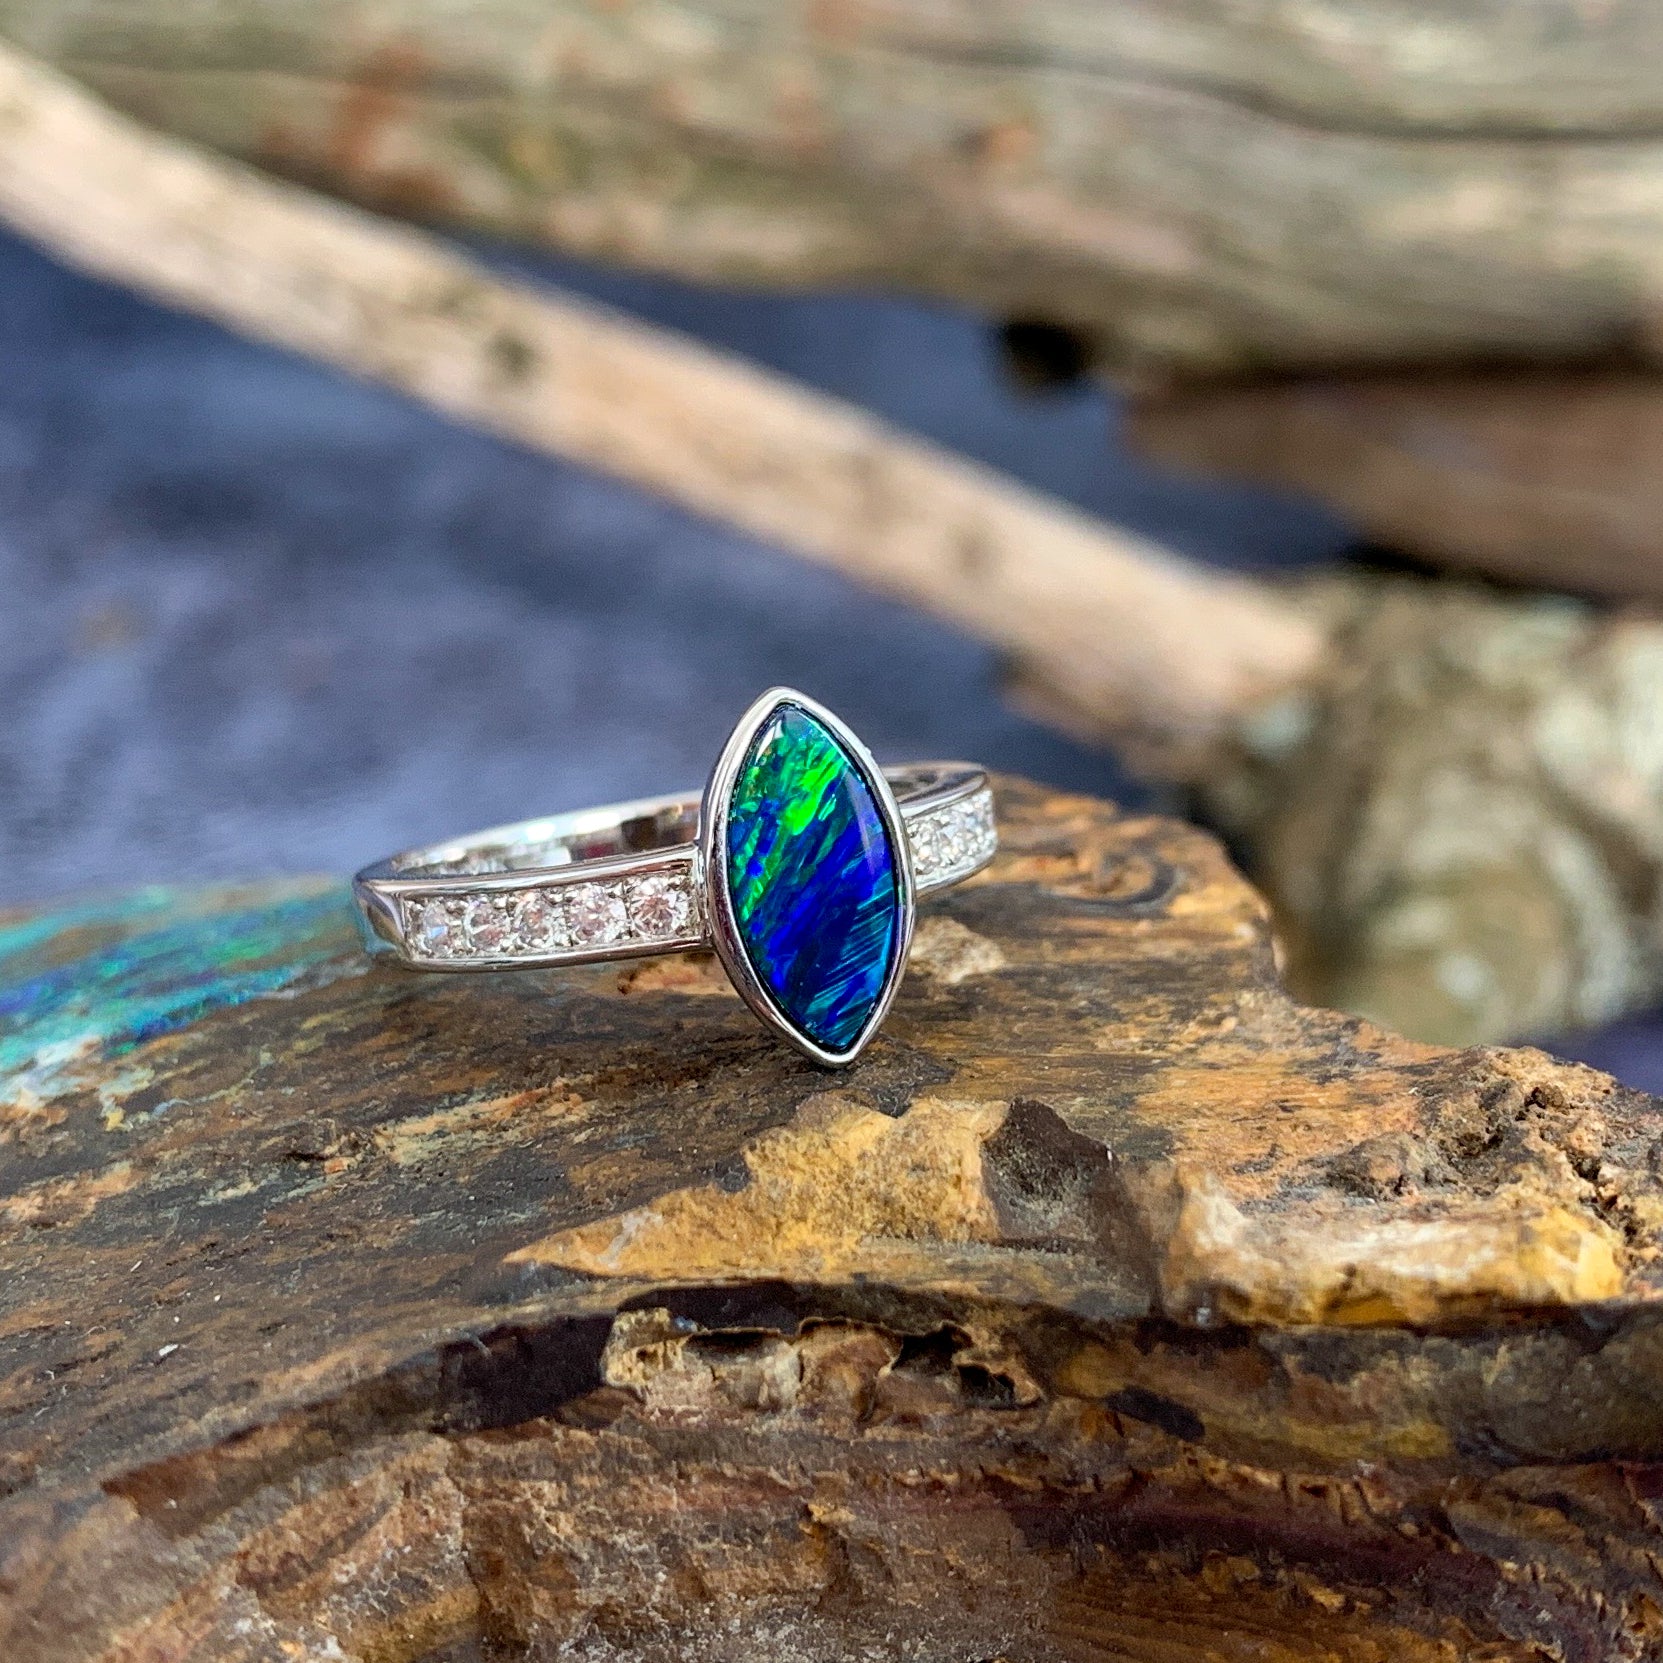 Sterling Silver Marquise shape Opal doublet and cubic zirconia ring - Masterpiece Jewellery Opal & Gems Sydney Australia | Online Shop